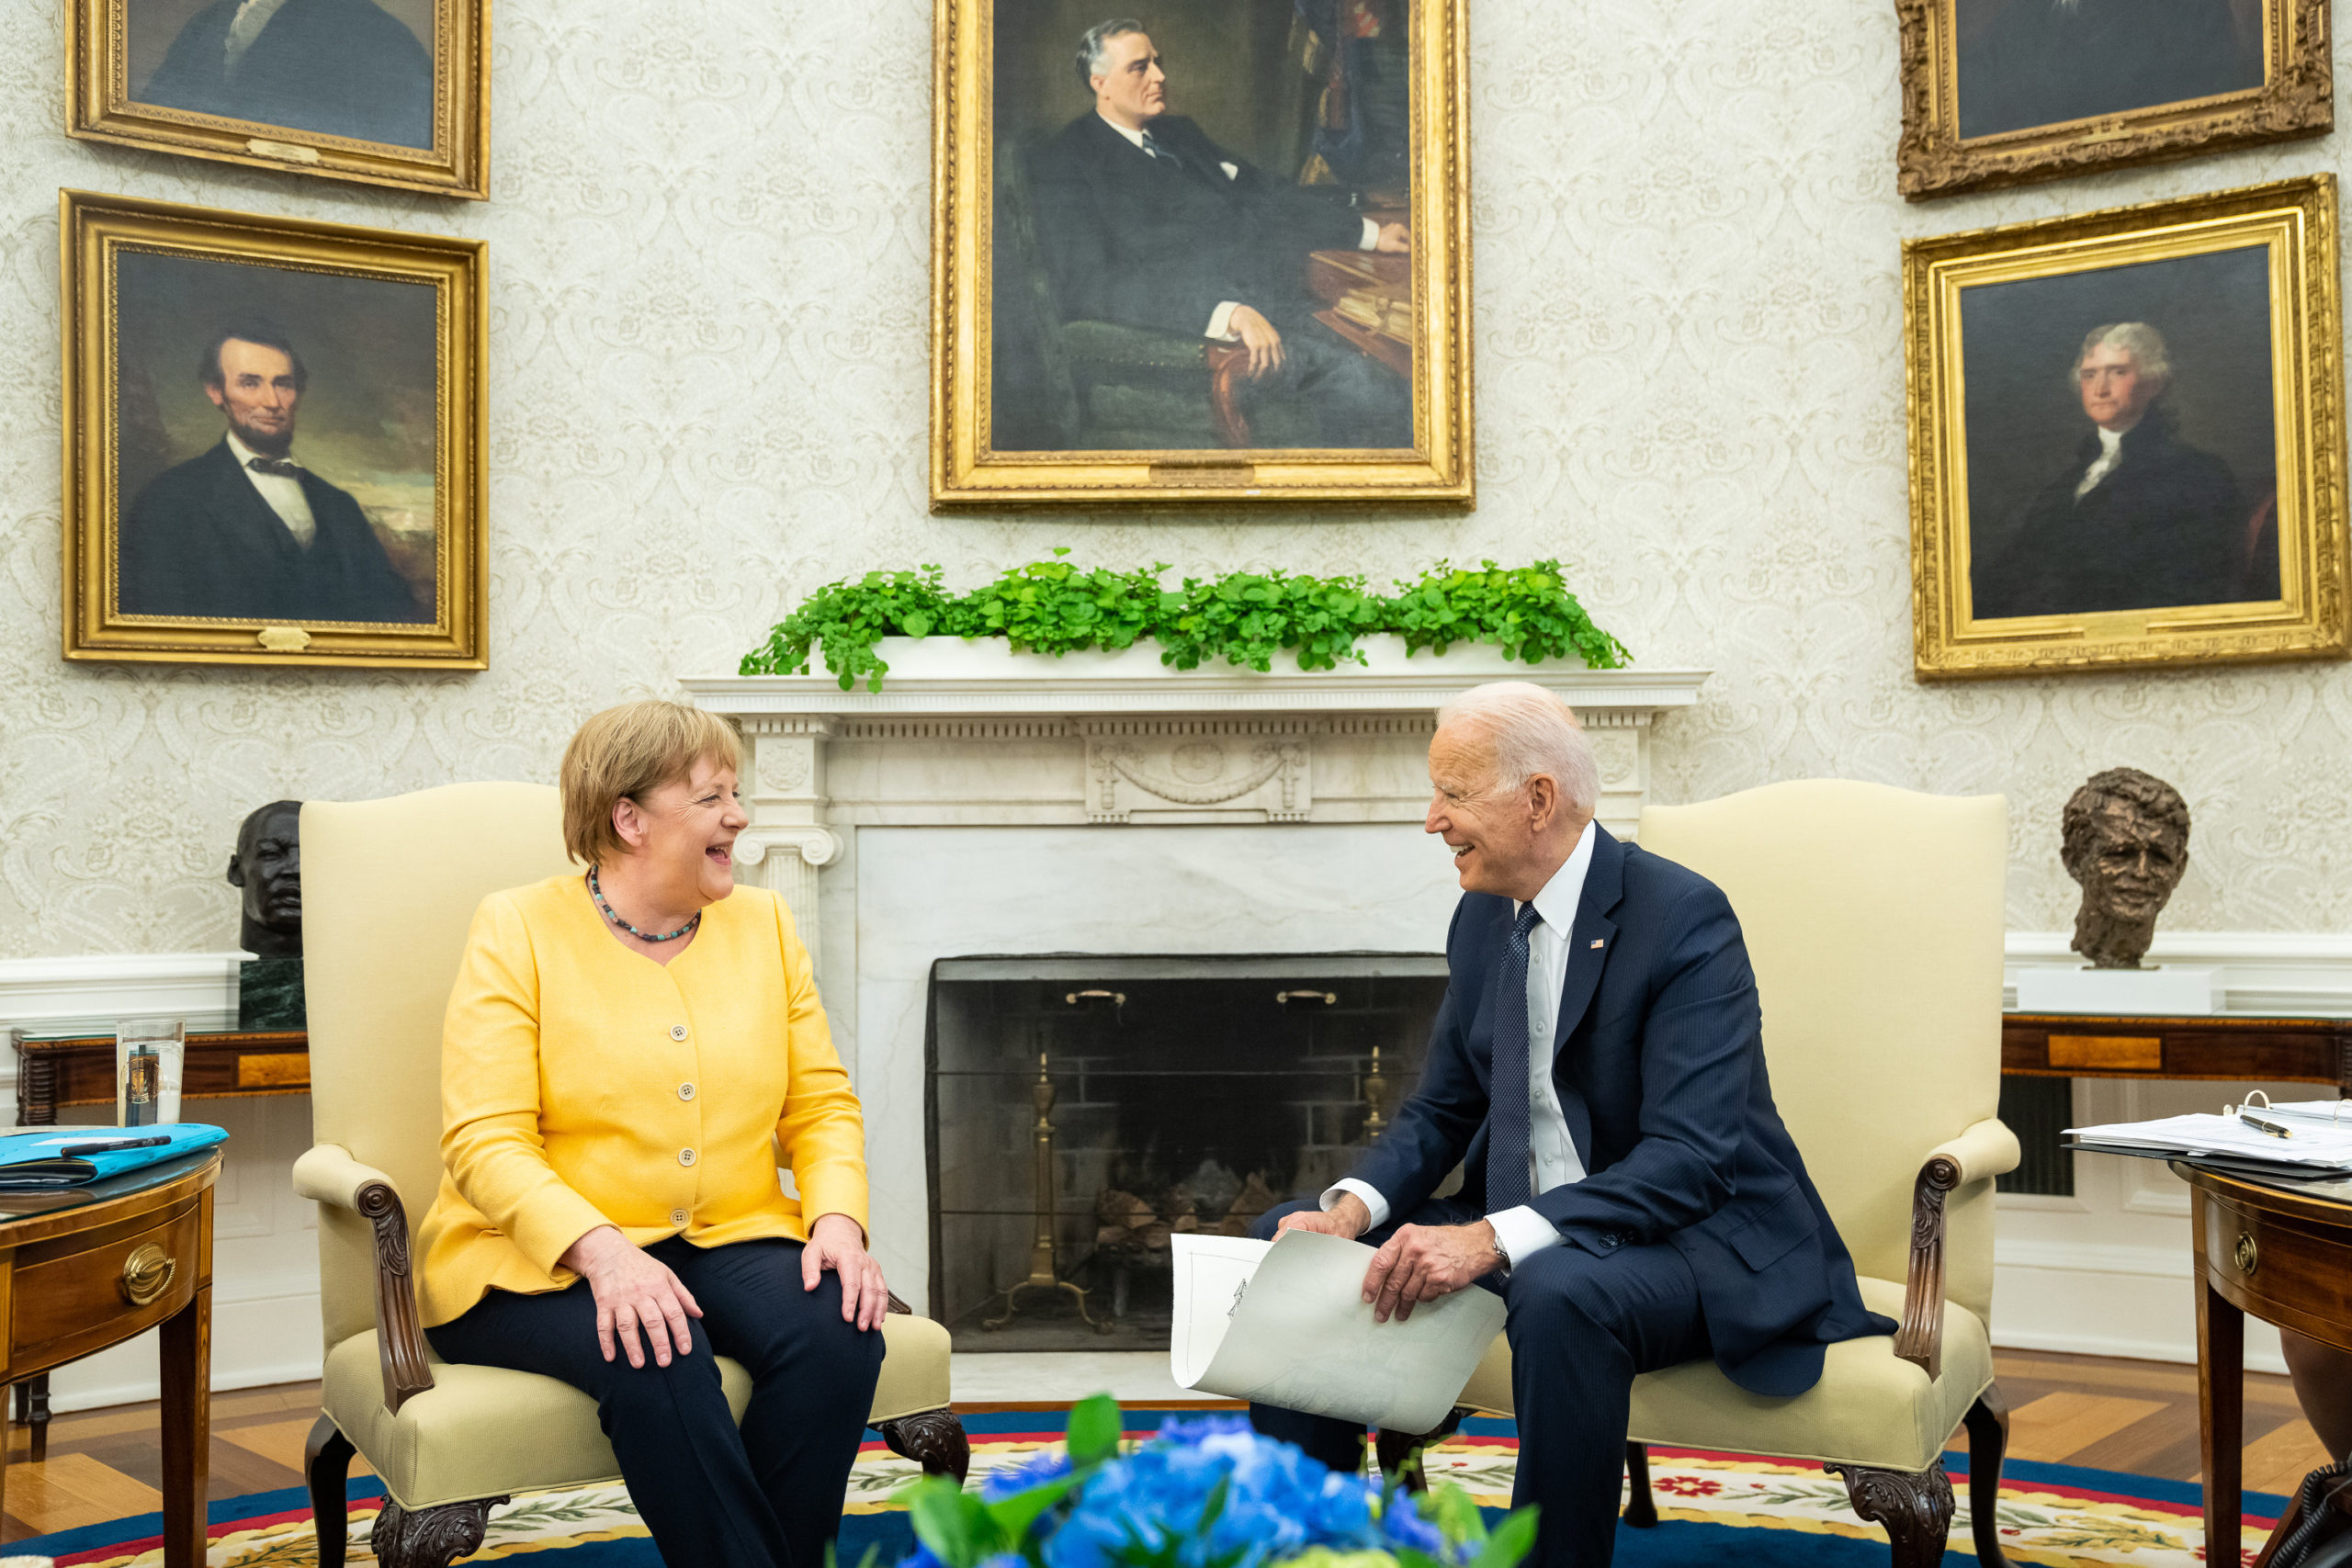 Eye on China, Biden and Germany’s Merkel agree to stand up for human rights, democratic values